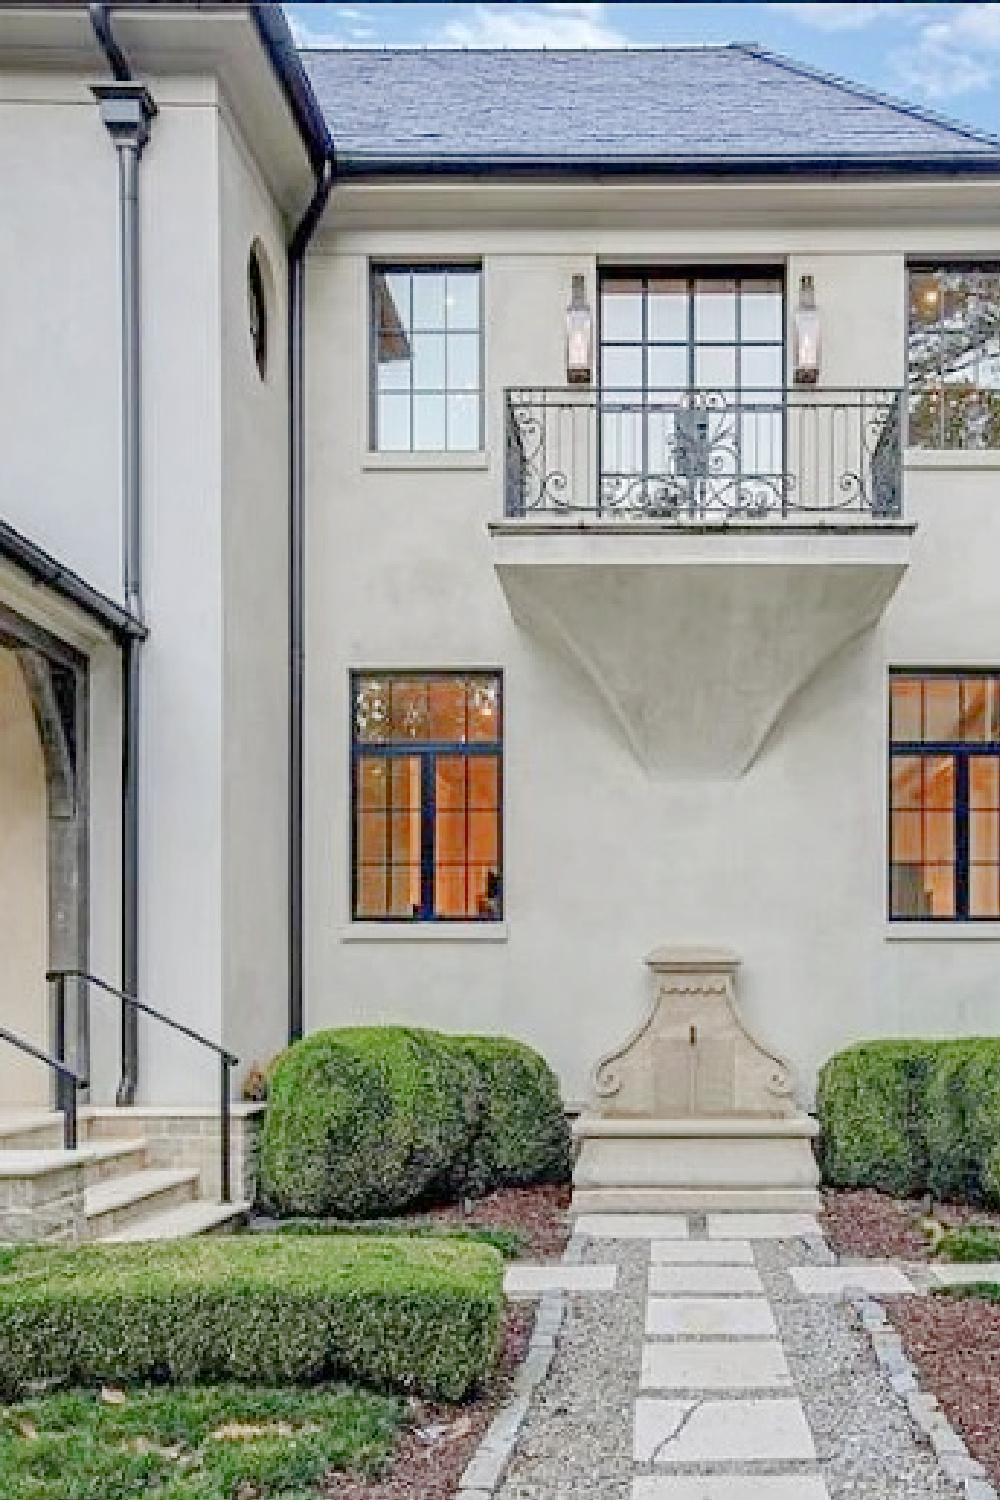 Beautiful French country home in Buckhead Atlanta neighborhood with exquisite architecture, craftsmanship, interior design and landscape. #frenchcountryhome #luxurioushomes